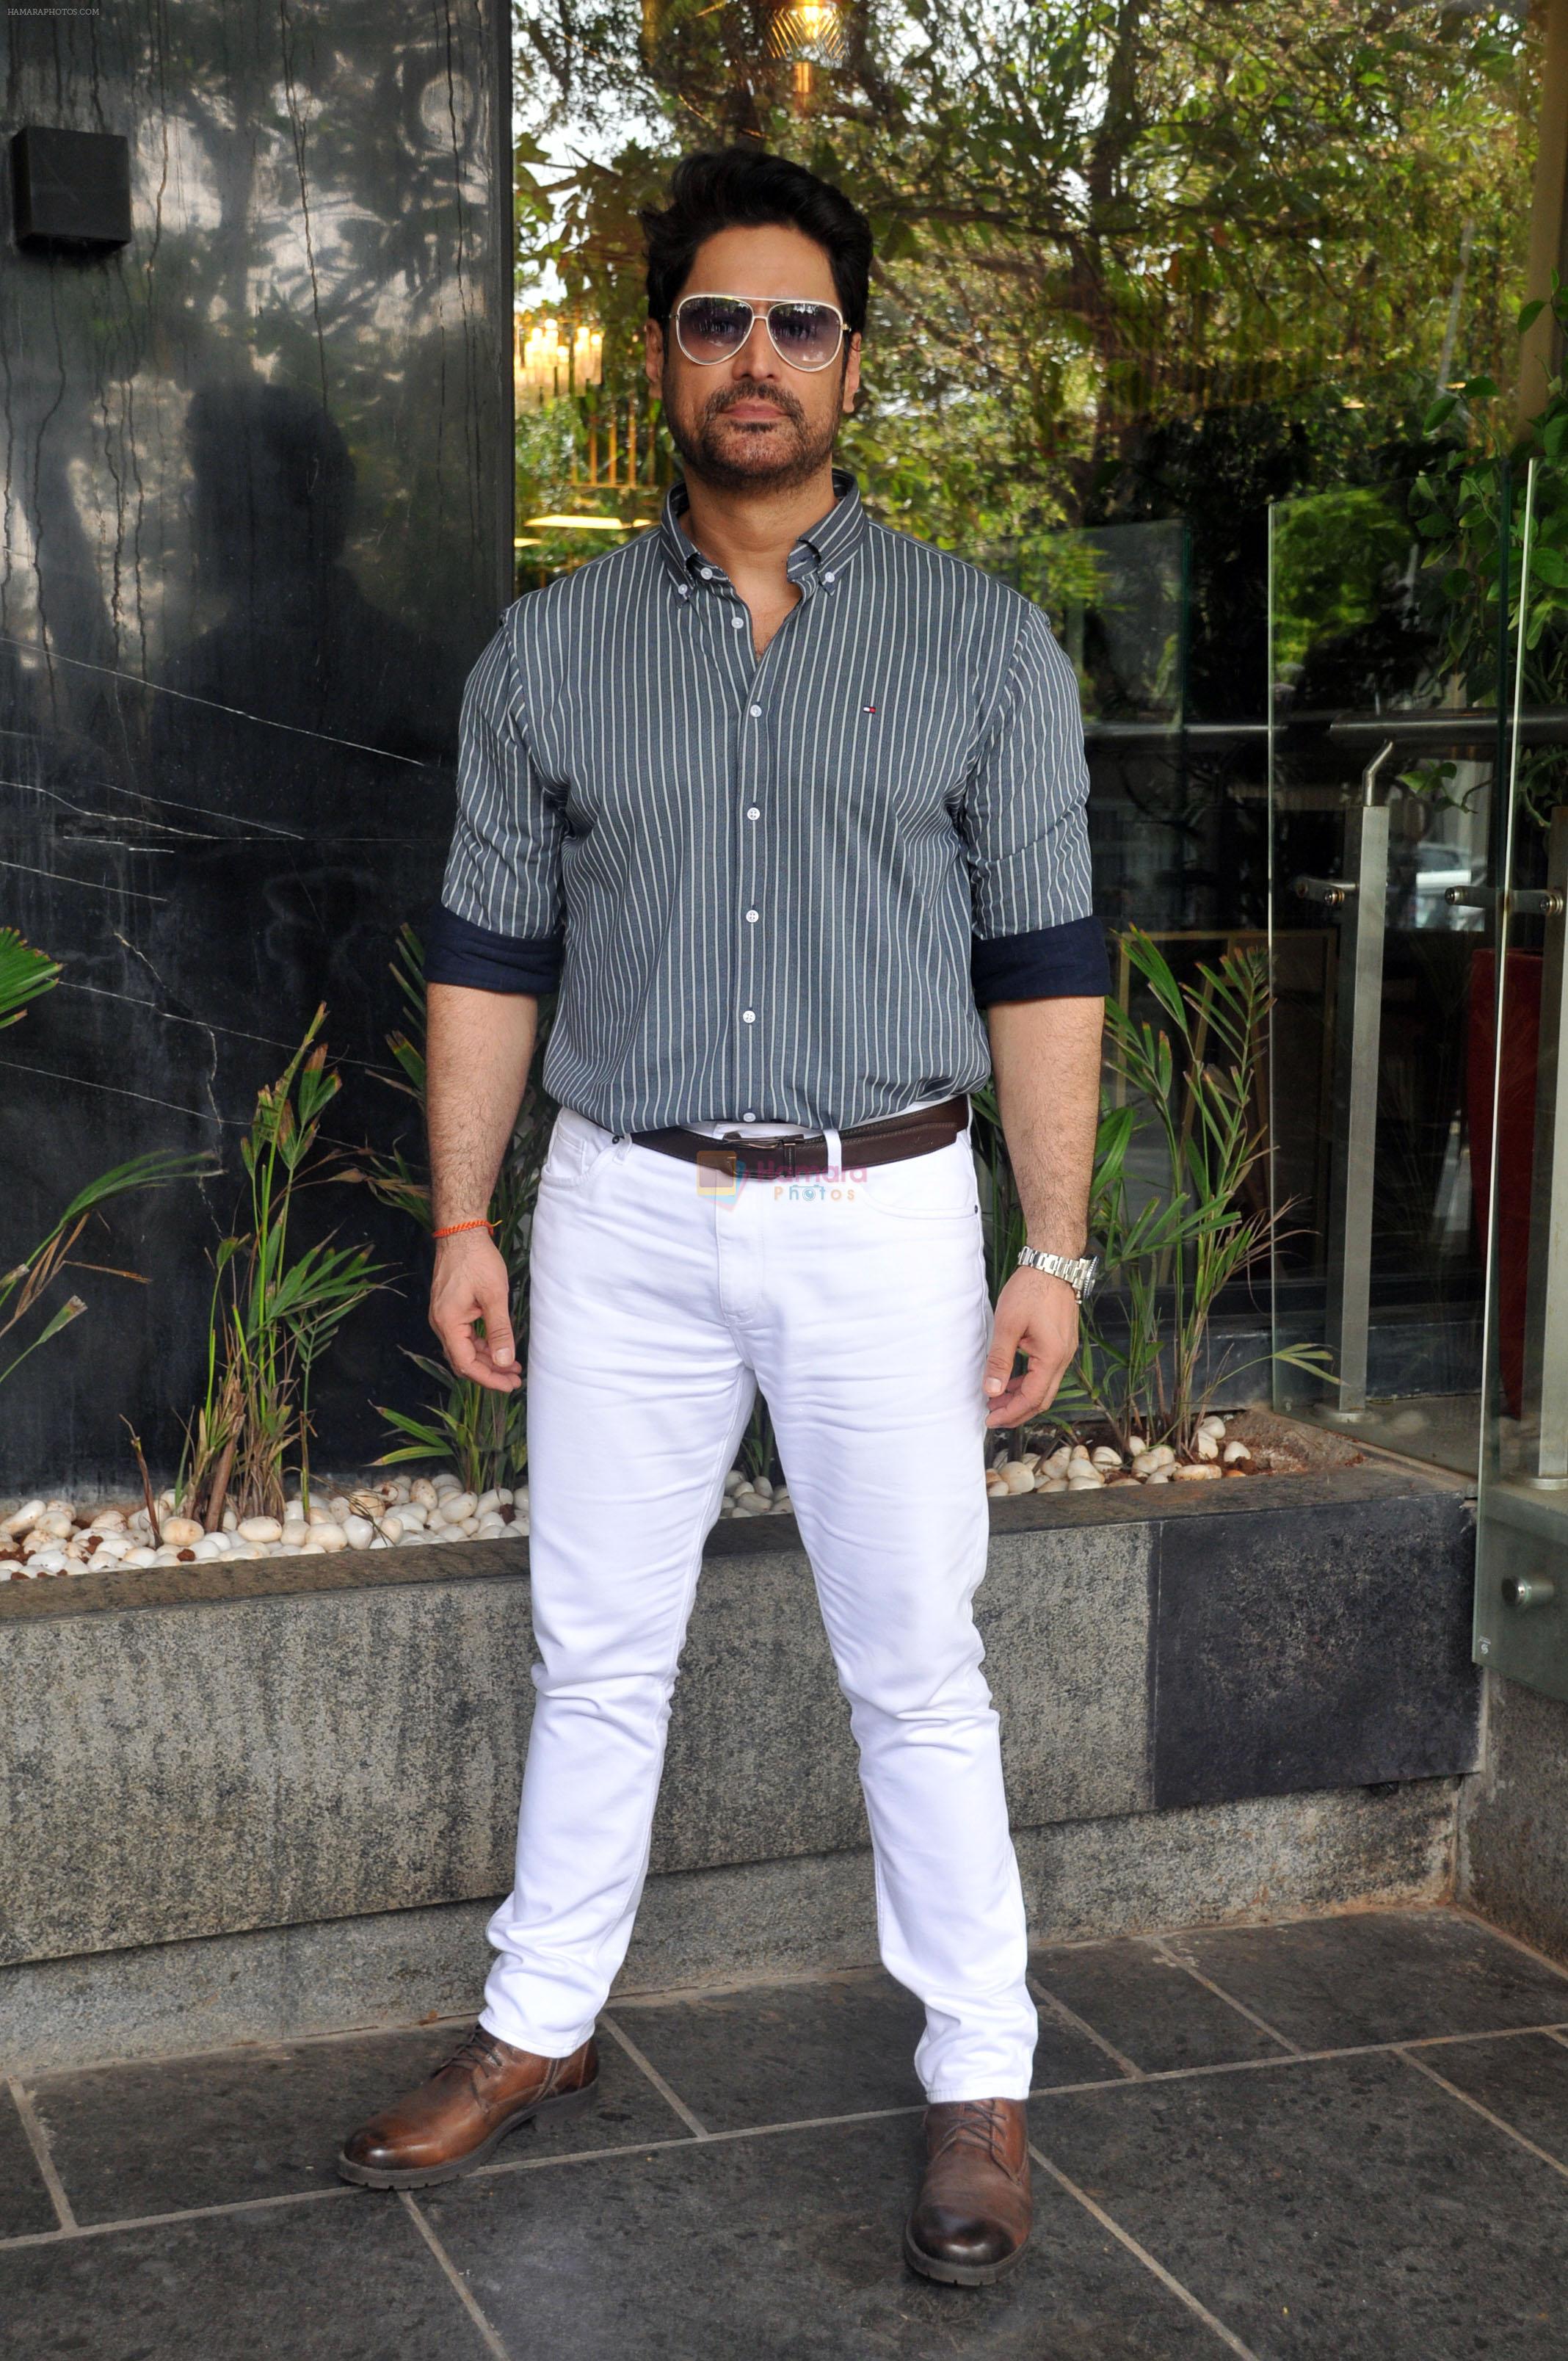 Mohit Raina promoting The Freelancer series at Hyatt Centric in Juhu on 17th August 2023